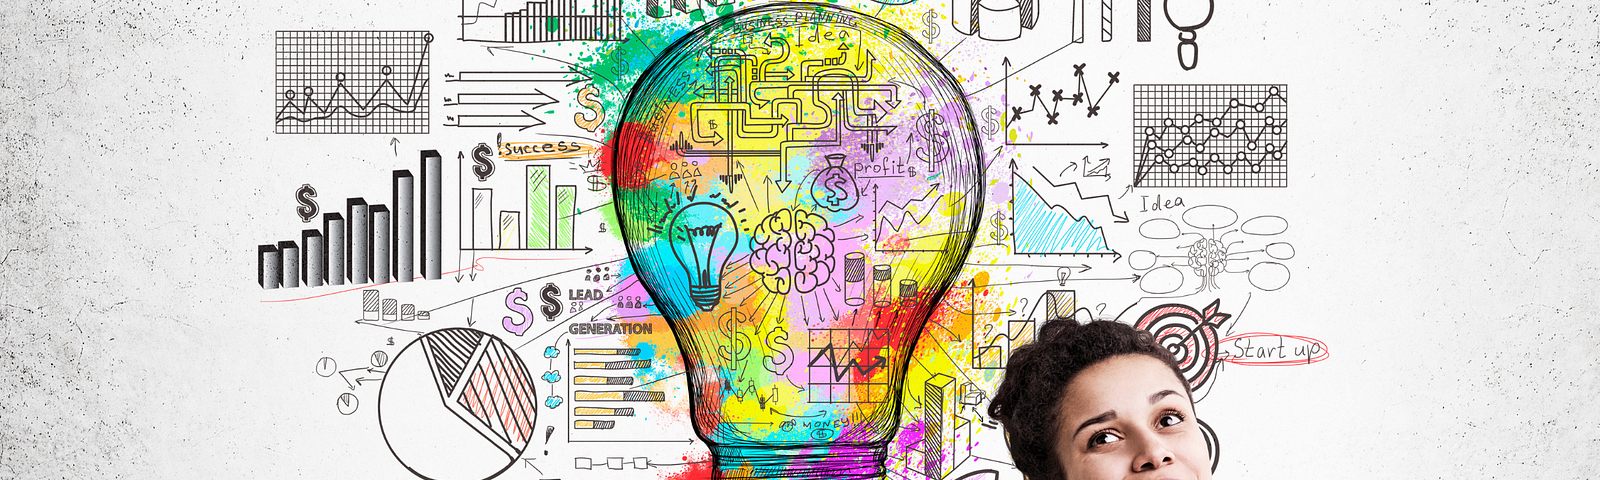 A sketch of a lightbulb with charts and graphs and words about business growth and a woman in the lower right corner with a smile on her face, thinking.